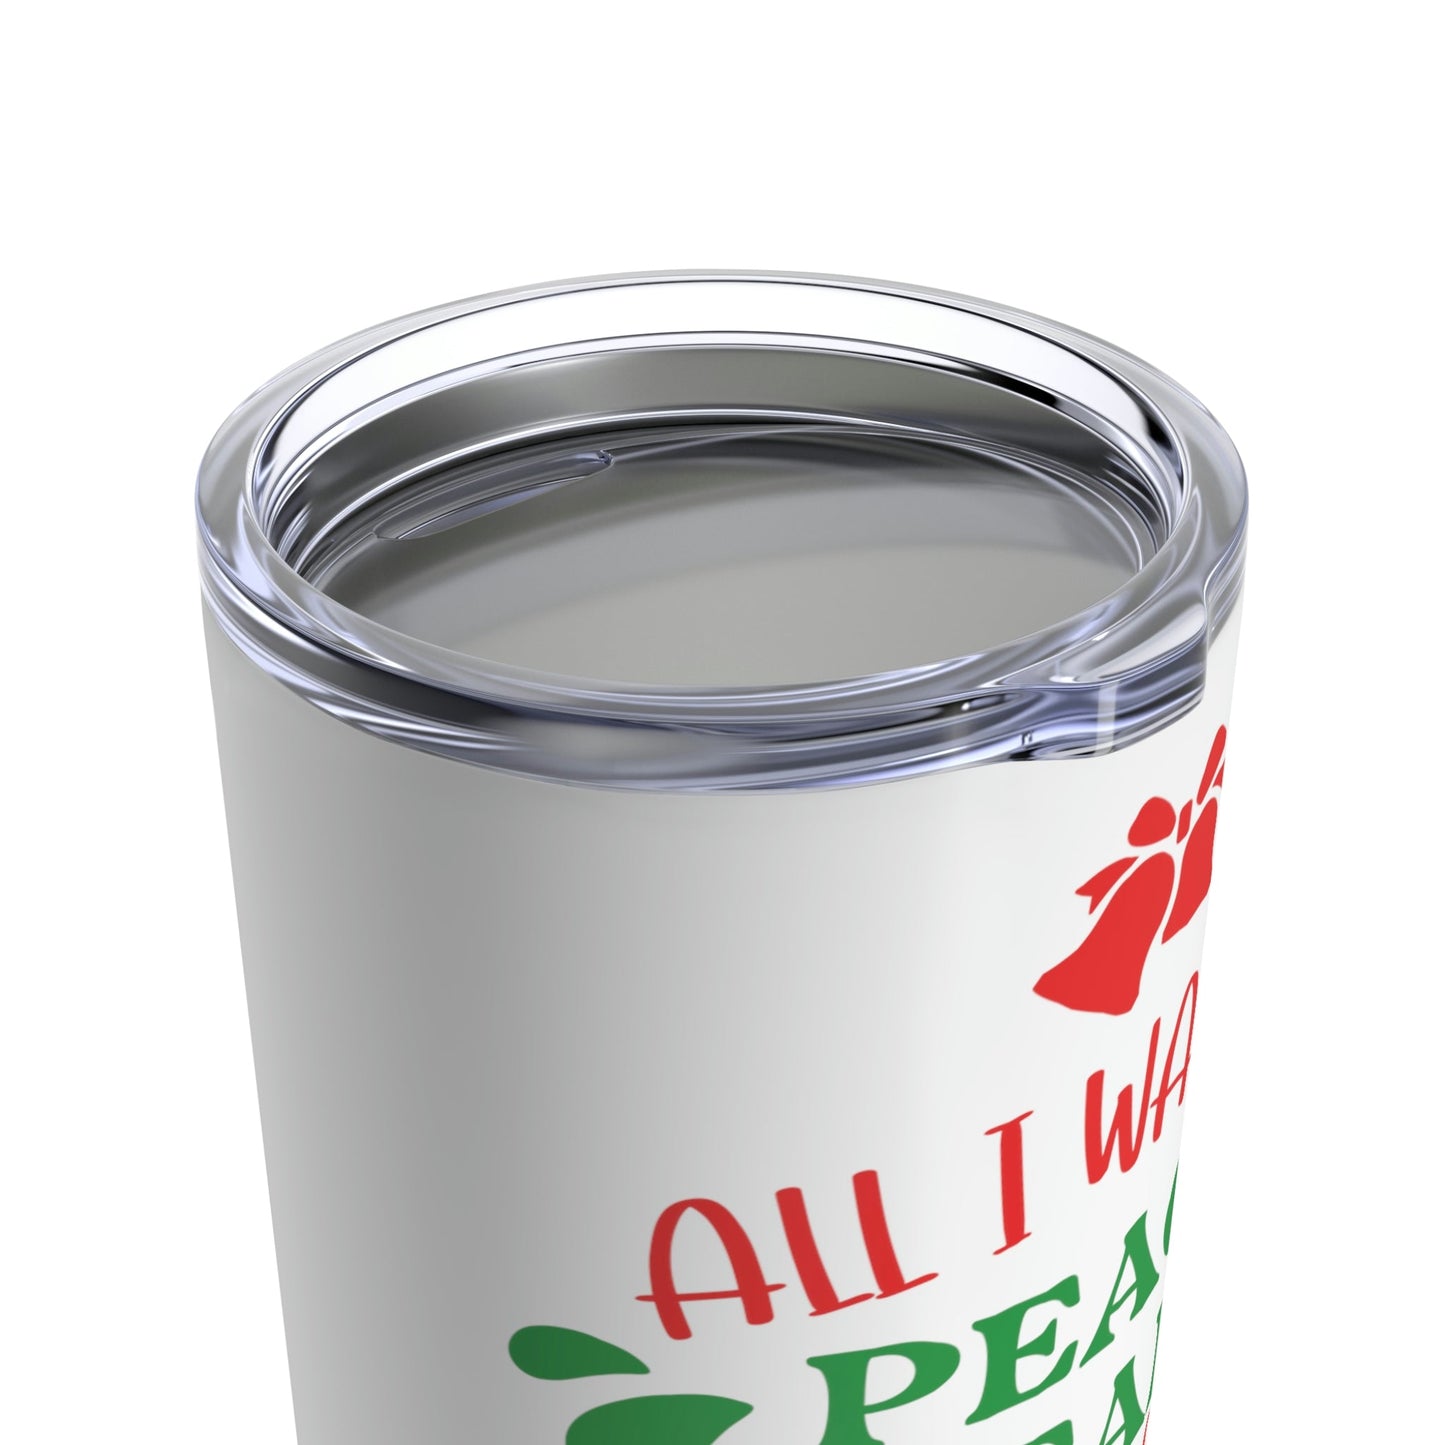 All You Need is Peace on Earth And Cute Shoes Funny Fashion Jokes Stainless Steel Hot or Cold Vacuum Tumbler 20oz Ichaku [Perfect Gifts Selection]